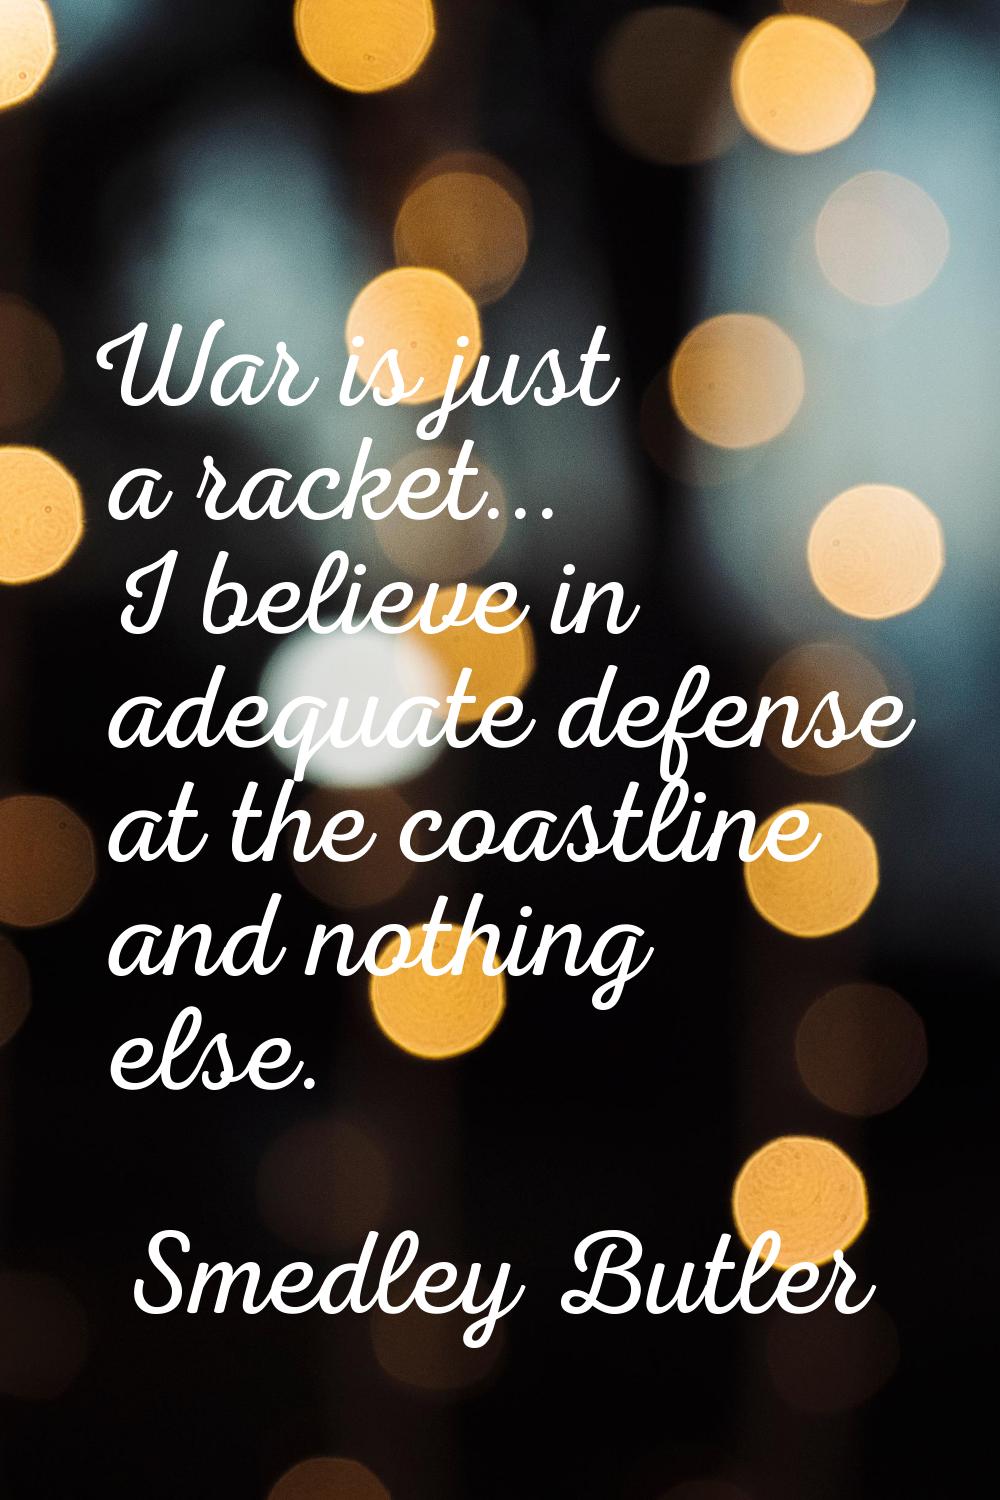 War is just a racket... I believe in adequate defense at the coastline and nothing else.